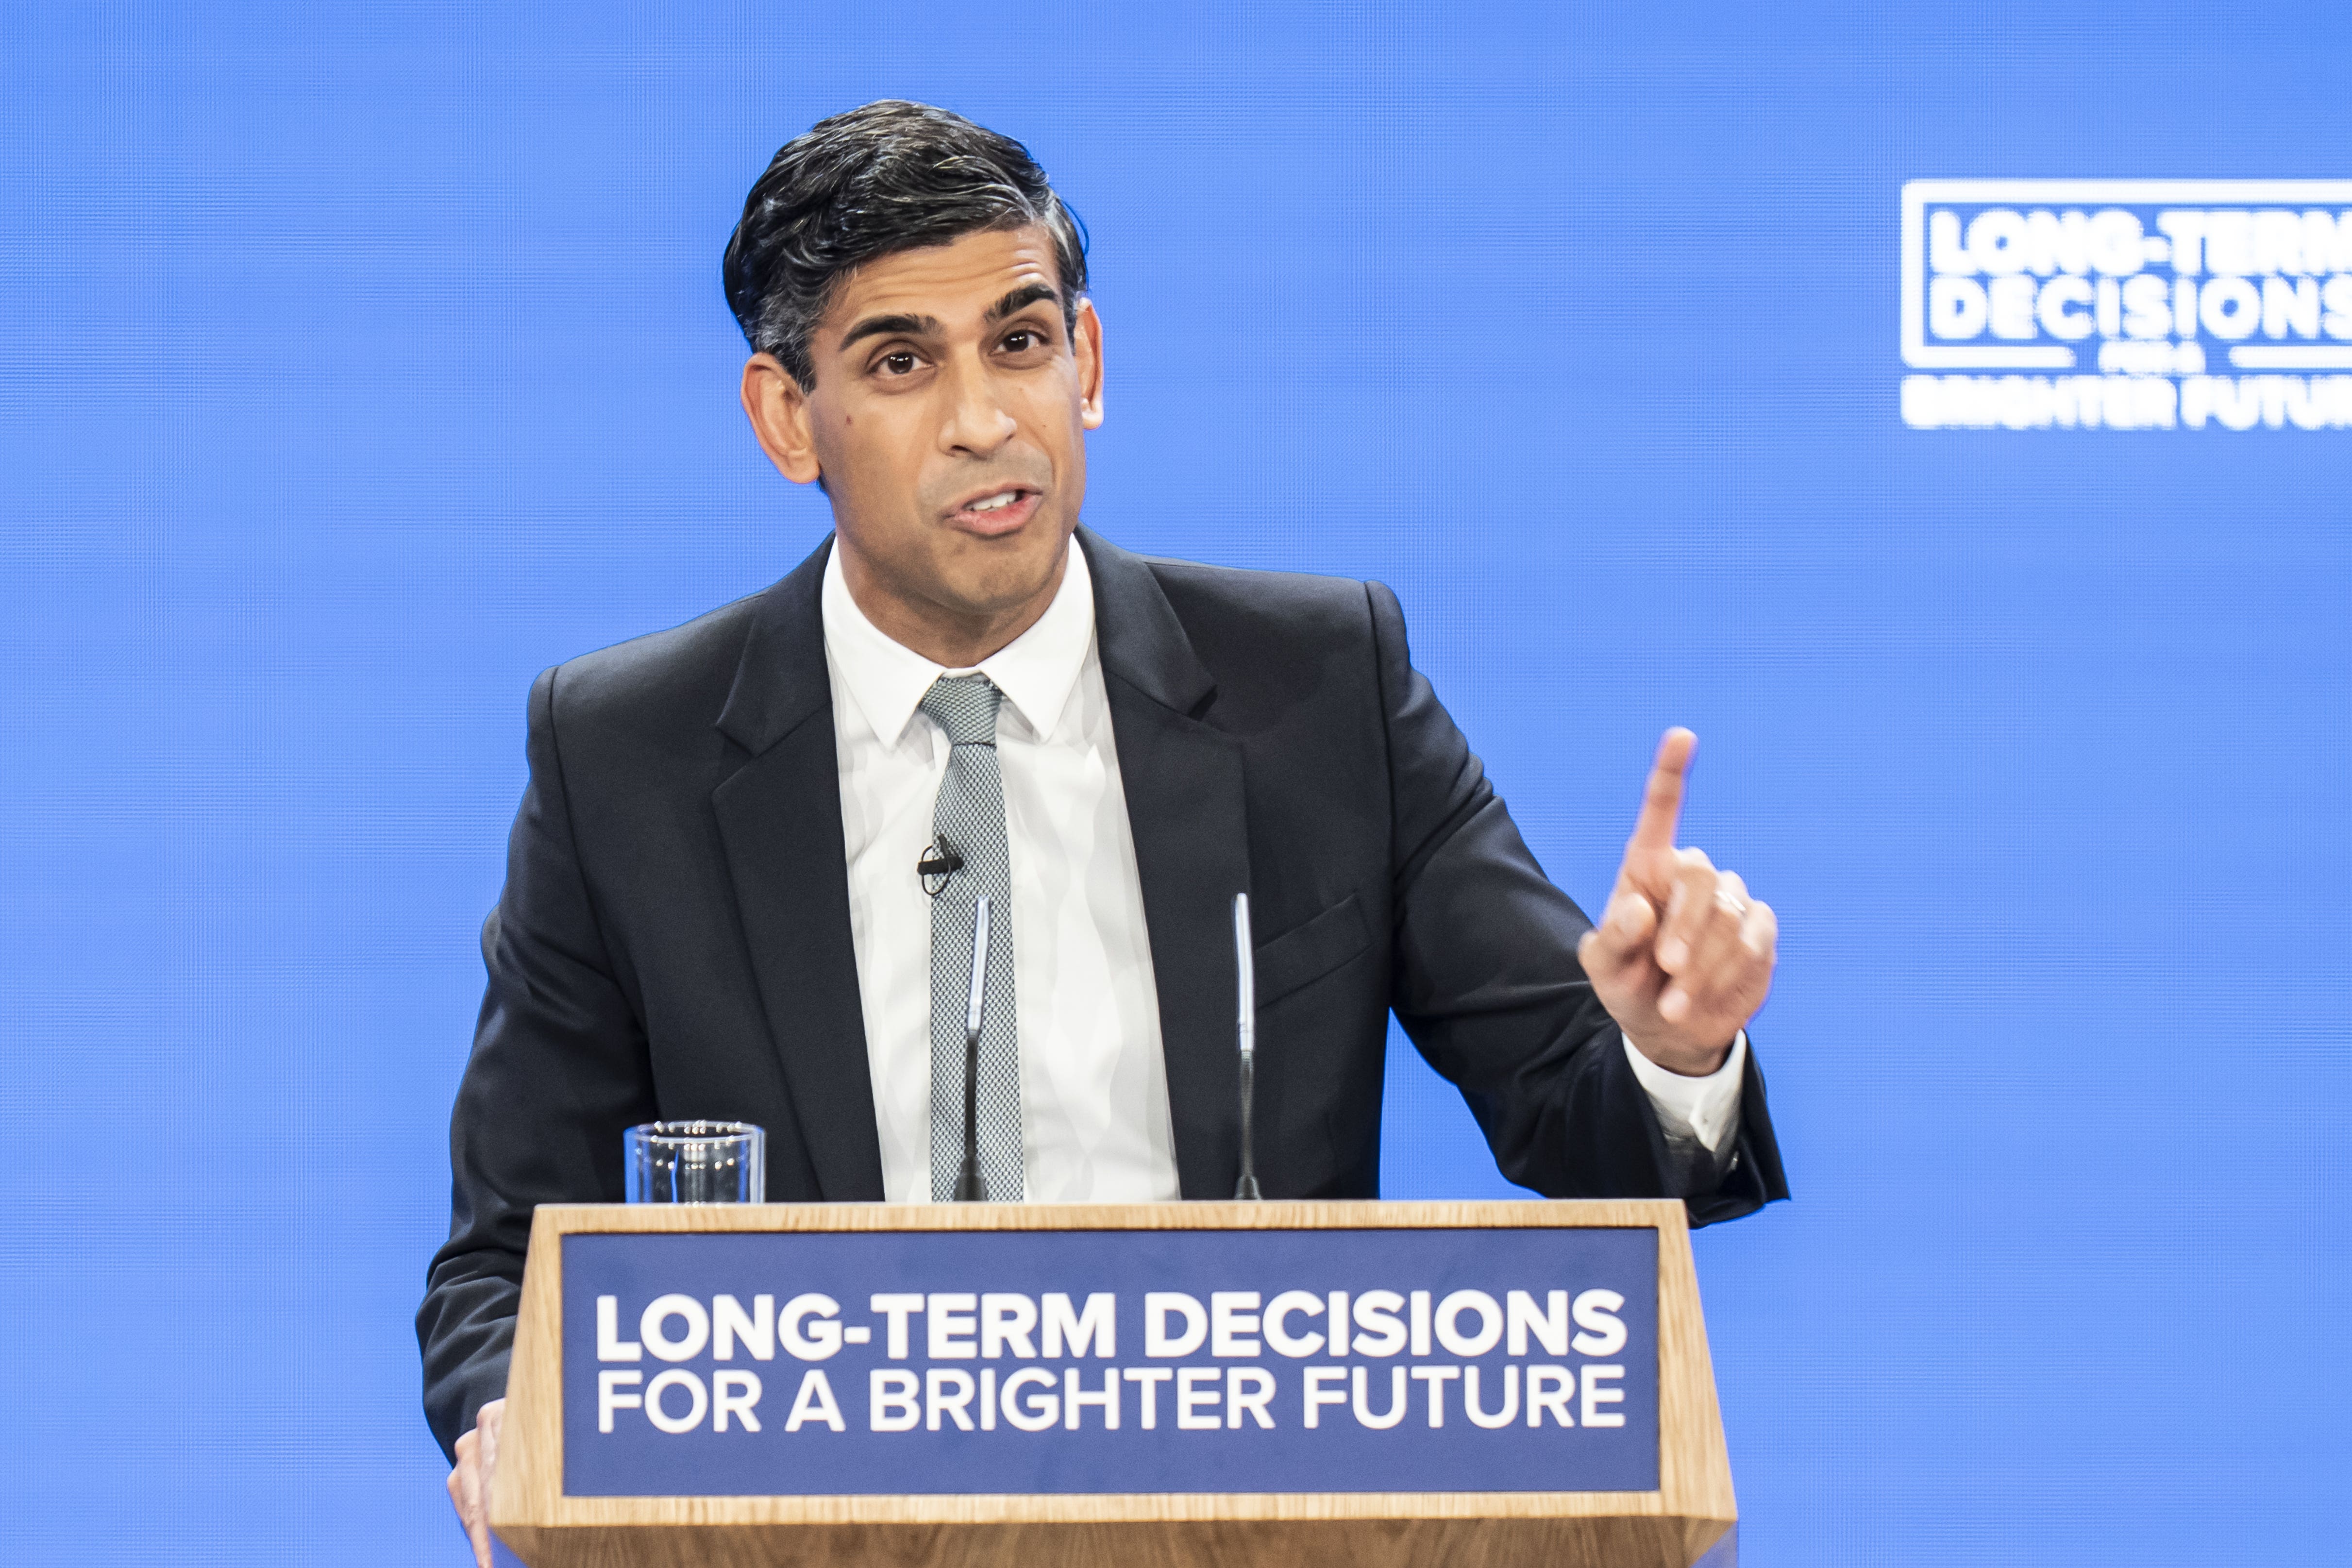 Prime minister Rishi Sunak delivers his keynote speech at the Conservative Party annual conference